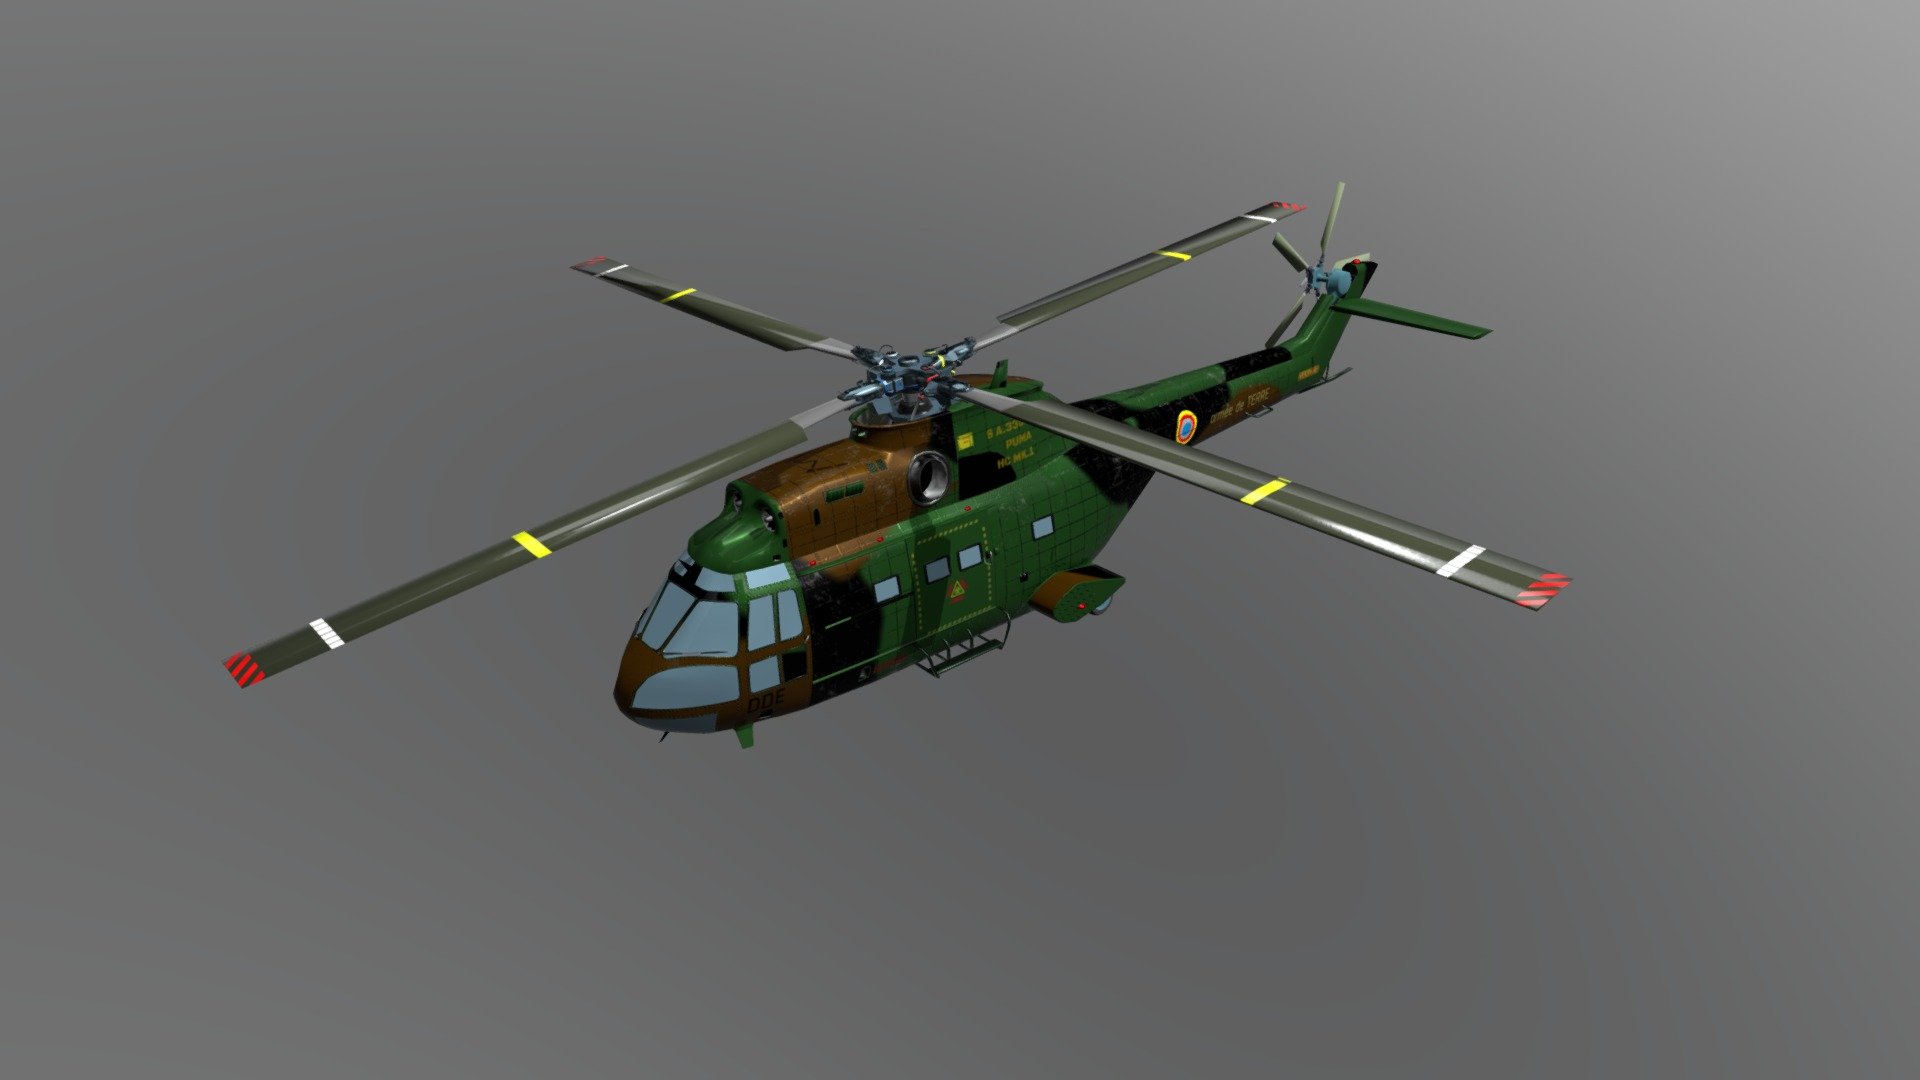 Helicopter Aérospatiale SA 330 Puma

Modeled in Blender 3.1.2
Textured in substance painter
Render in cycle - Helicopter Puma - 3D model by Medeixo 3d model